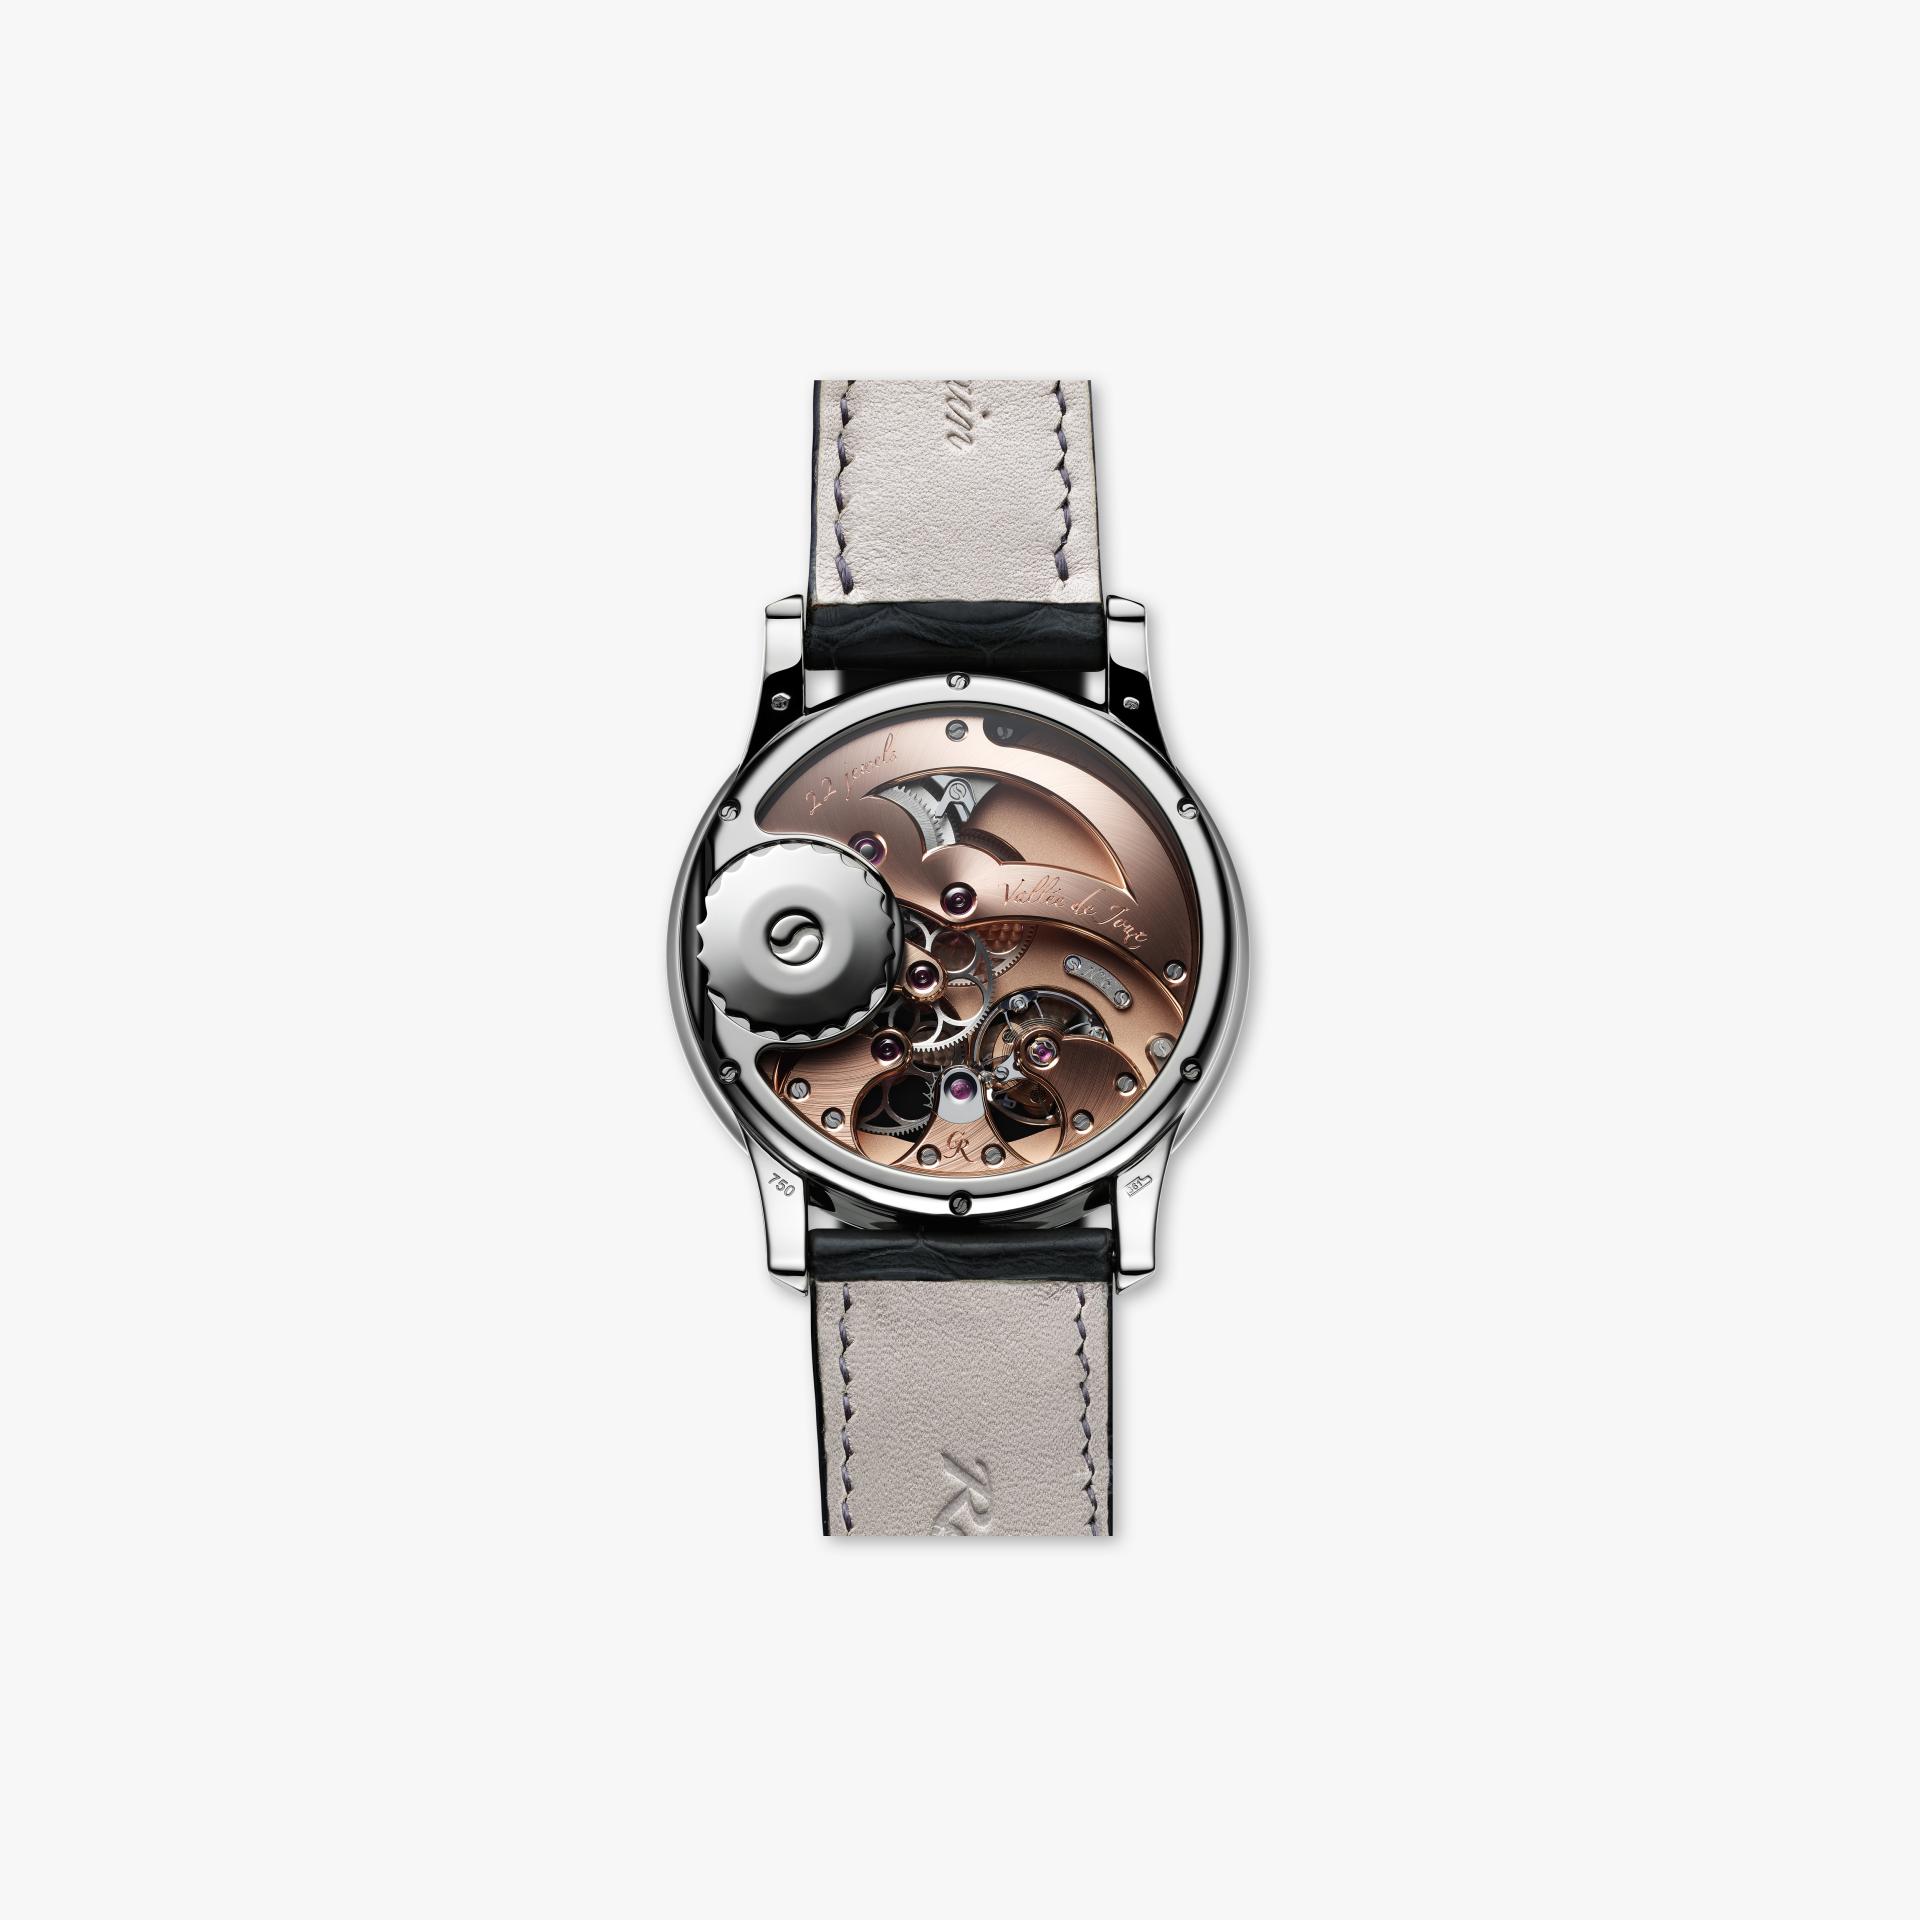 Heritage Prestige HMS made by Romain Gauthier